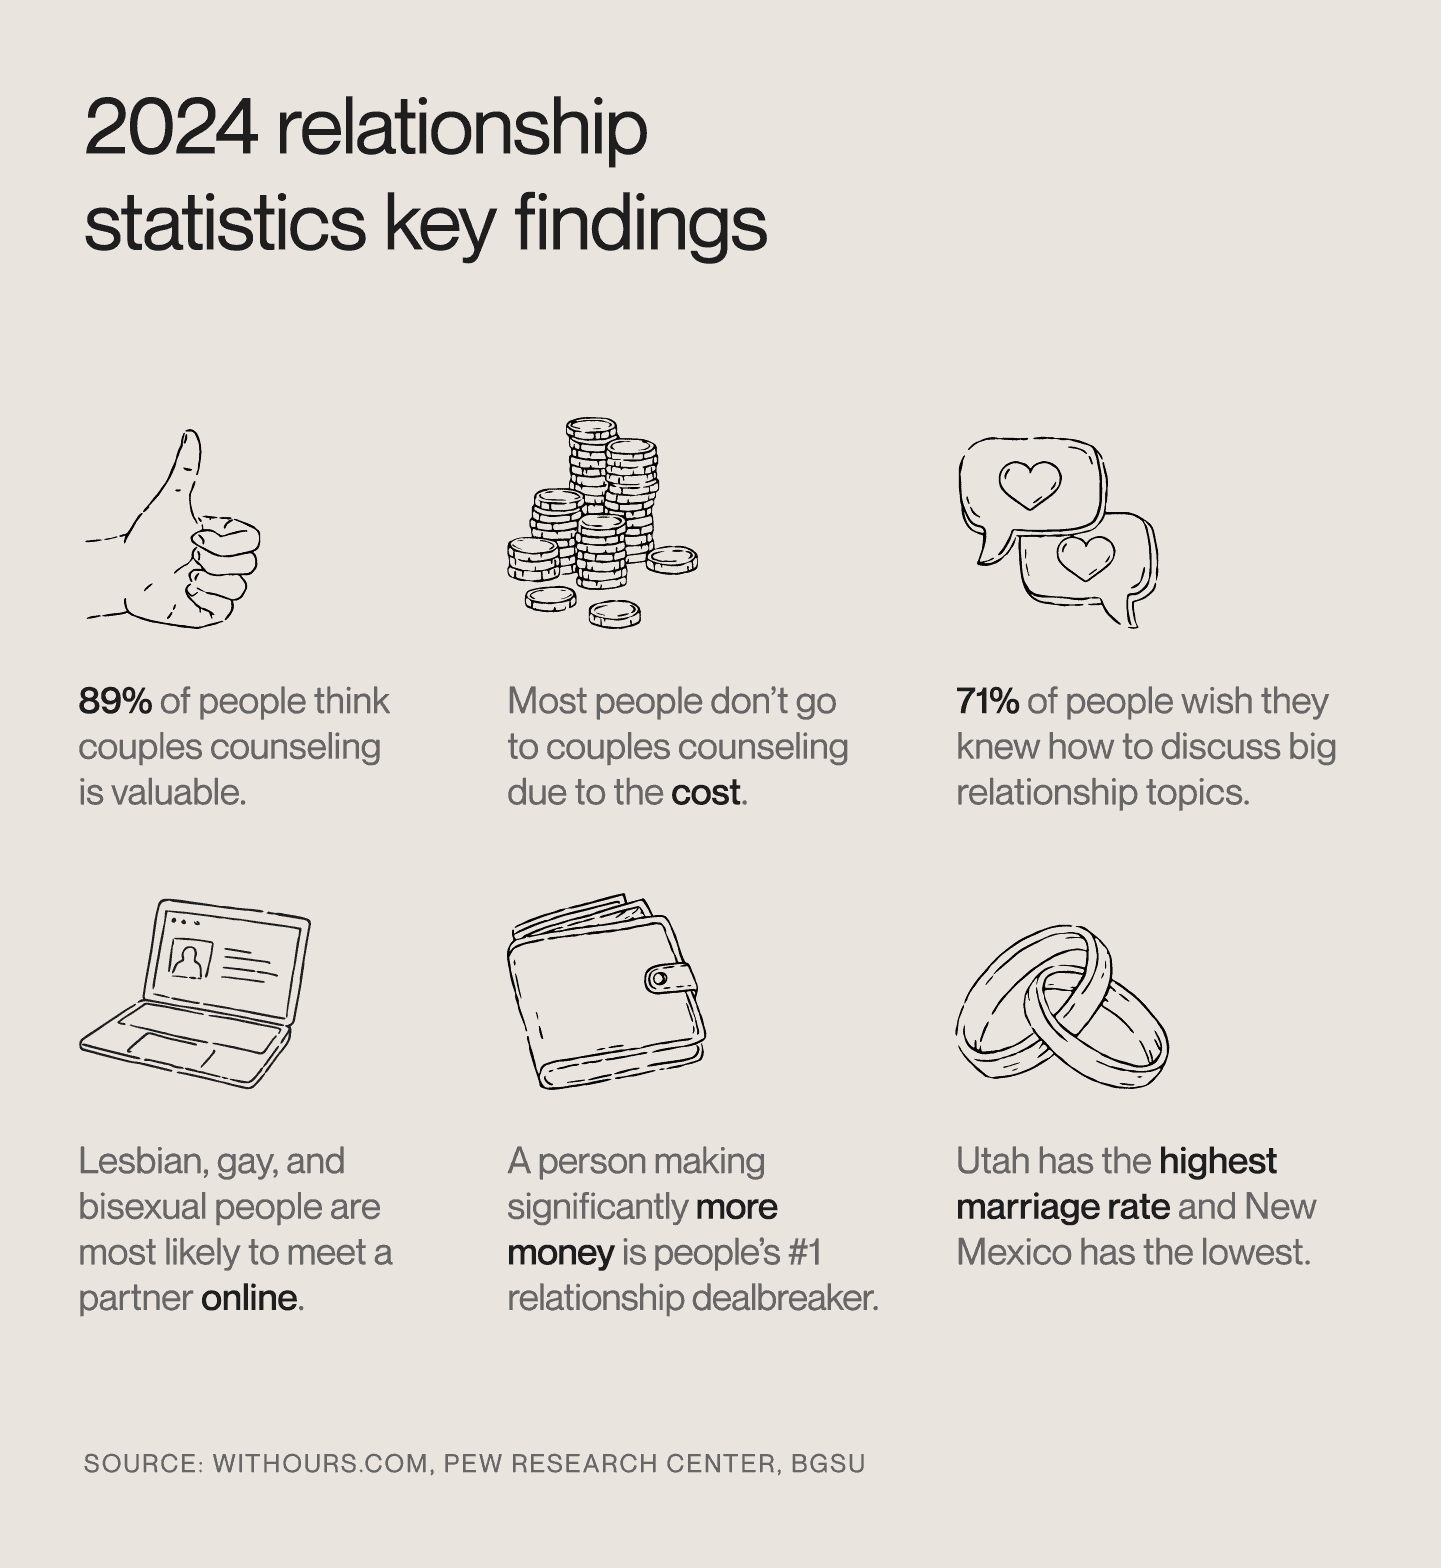 Key 2024 relationship statistics about couples counseling, marriage rates, where couples meet and dealbreakers.